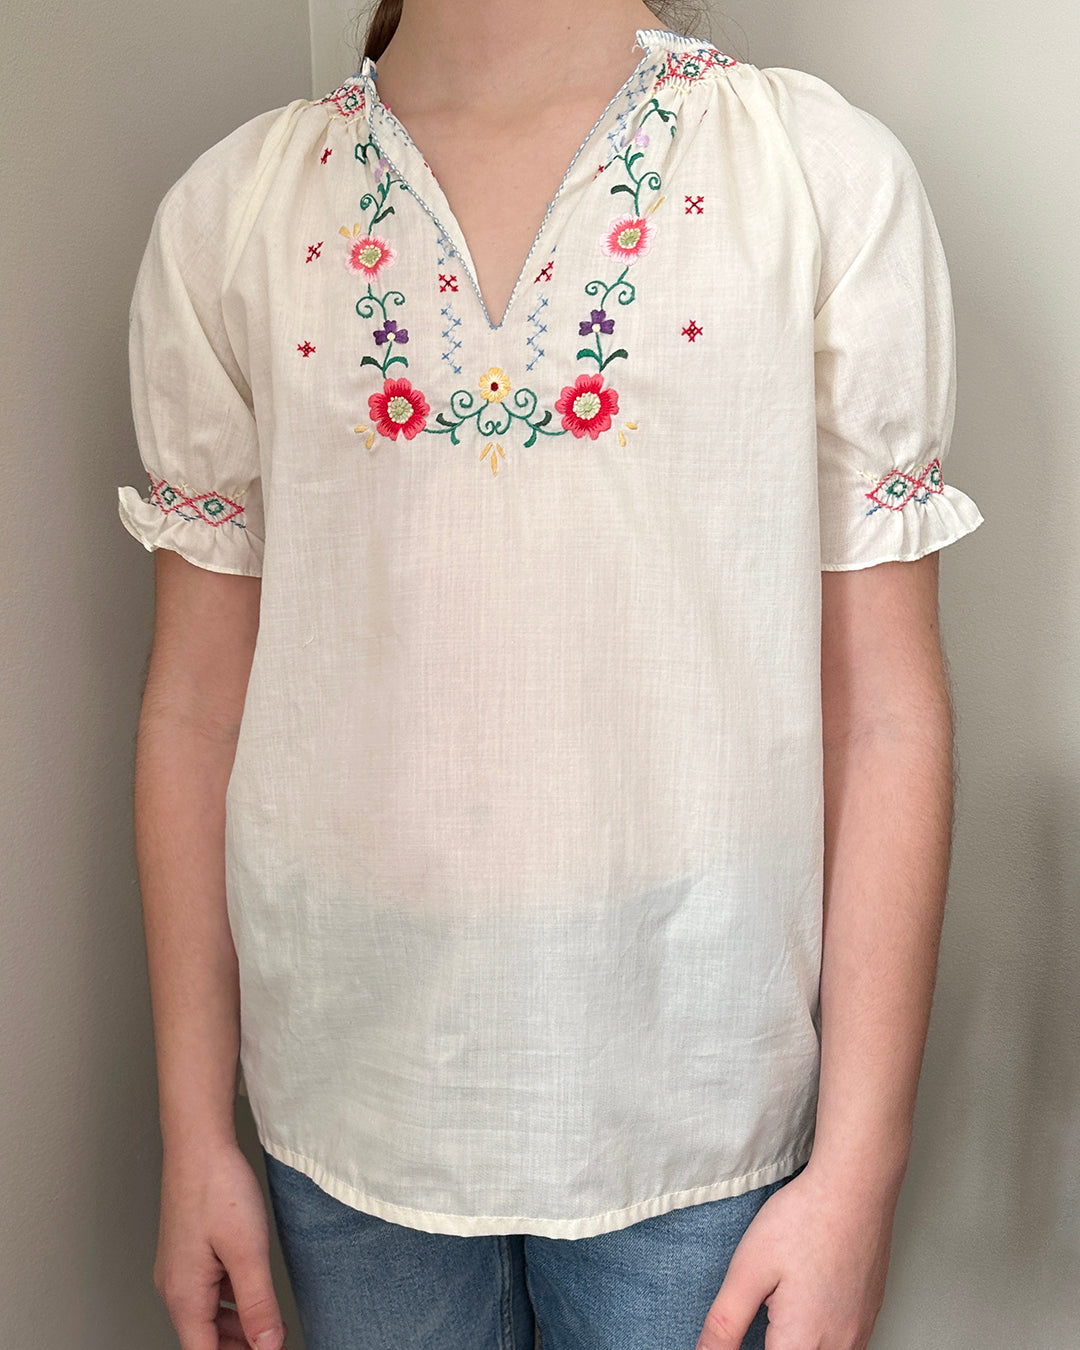 1960s CHILDREN'S HAND-EMBROIDERED PEASANT BLOUSE